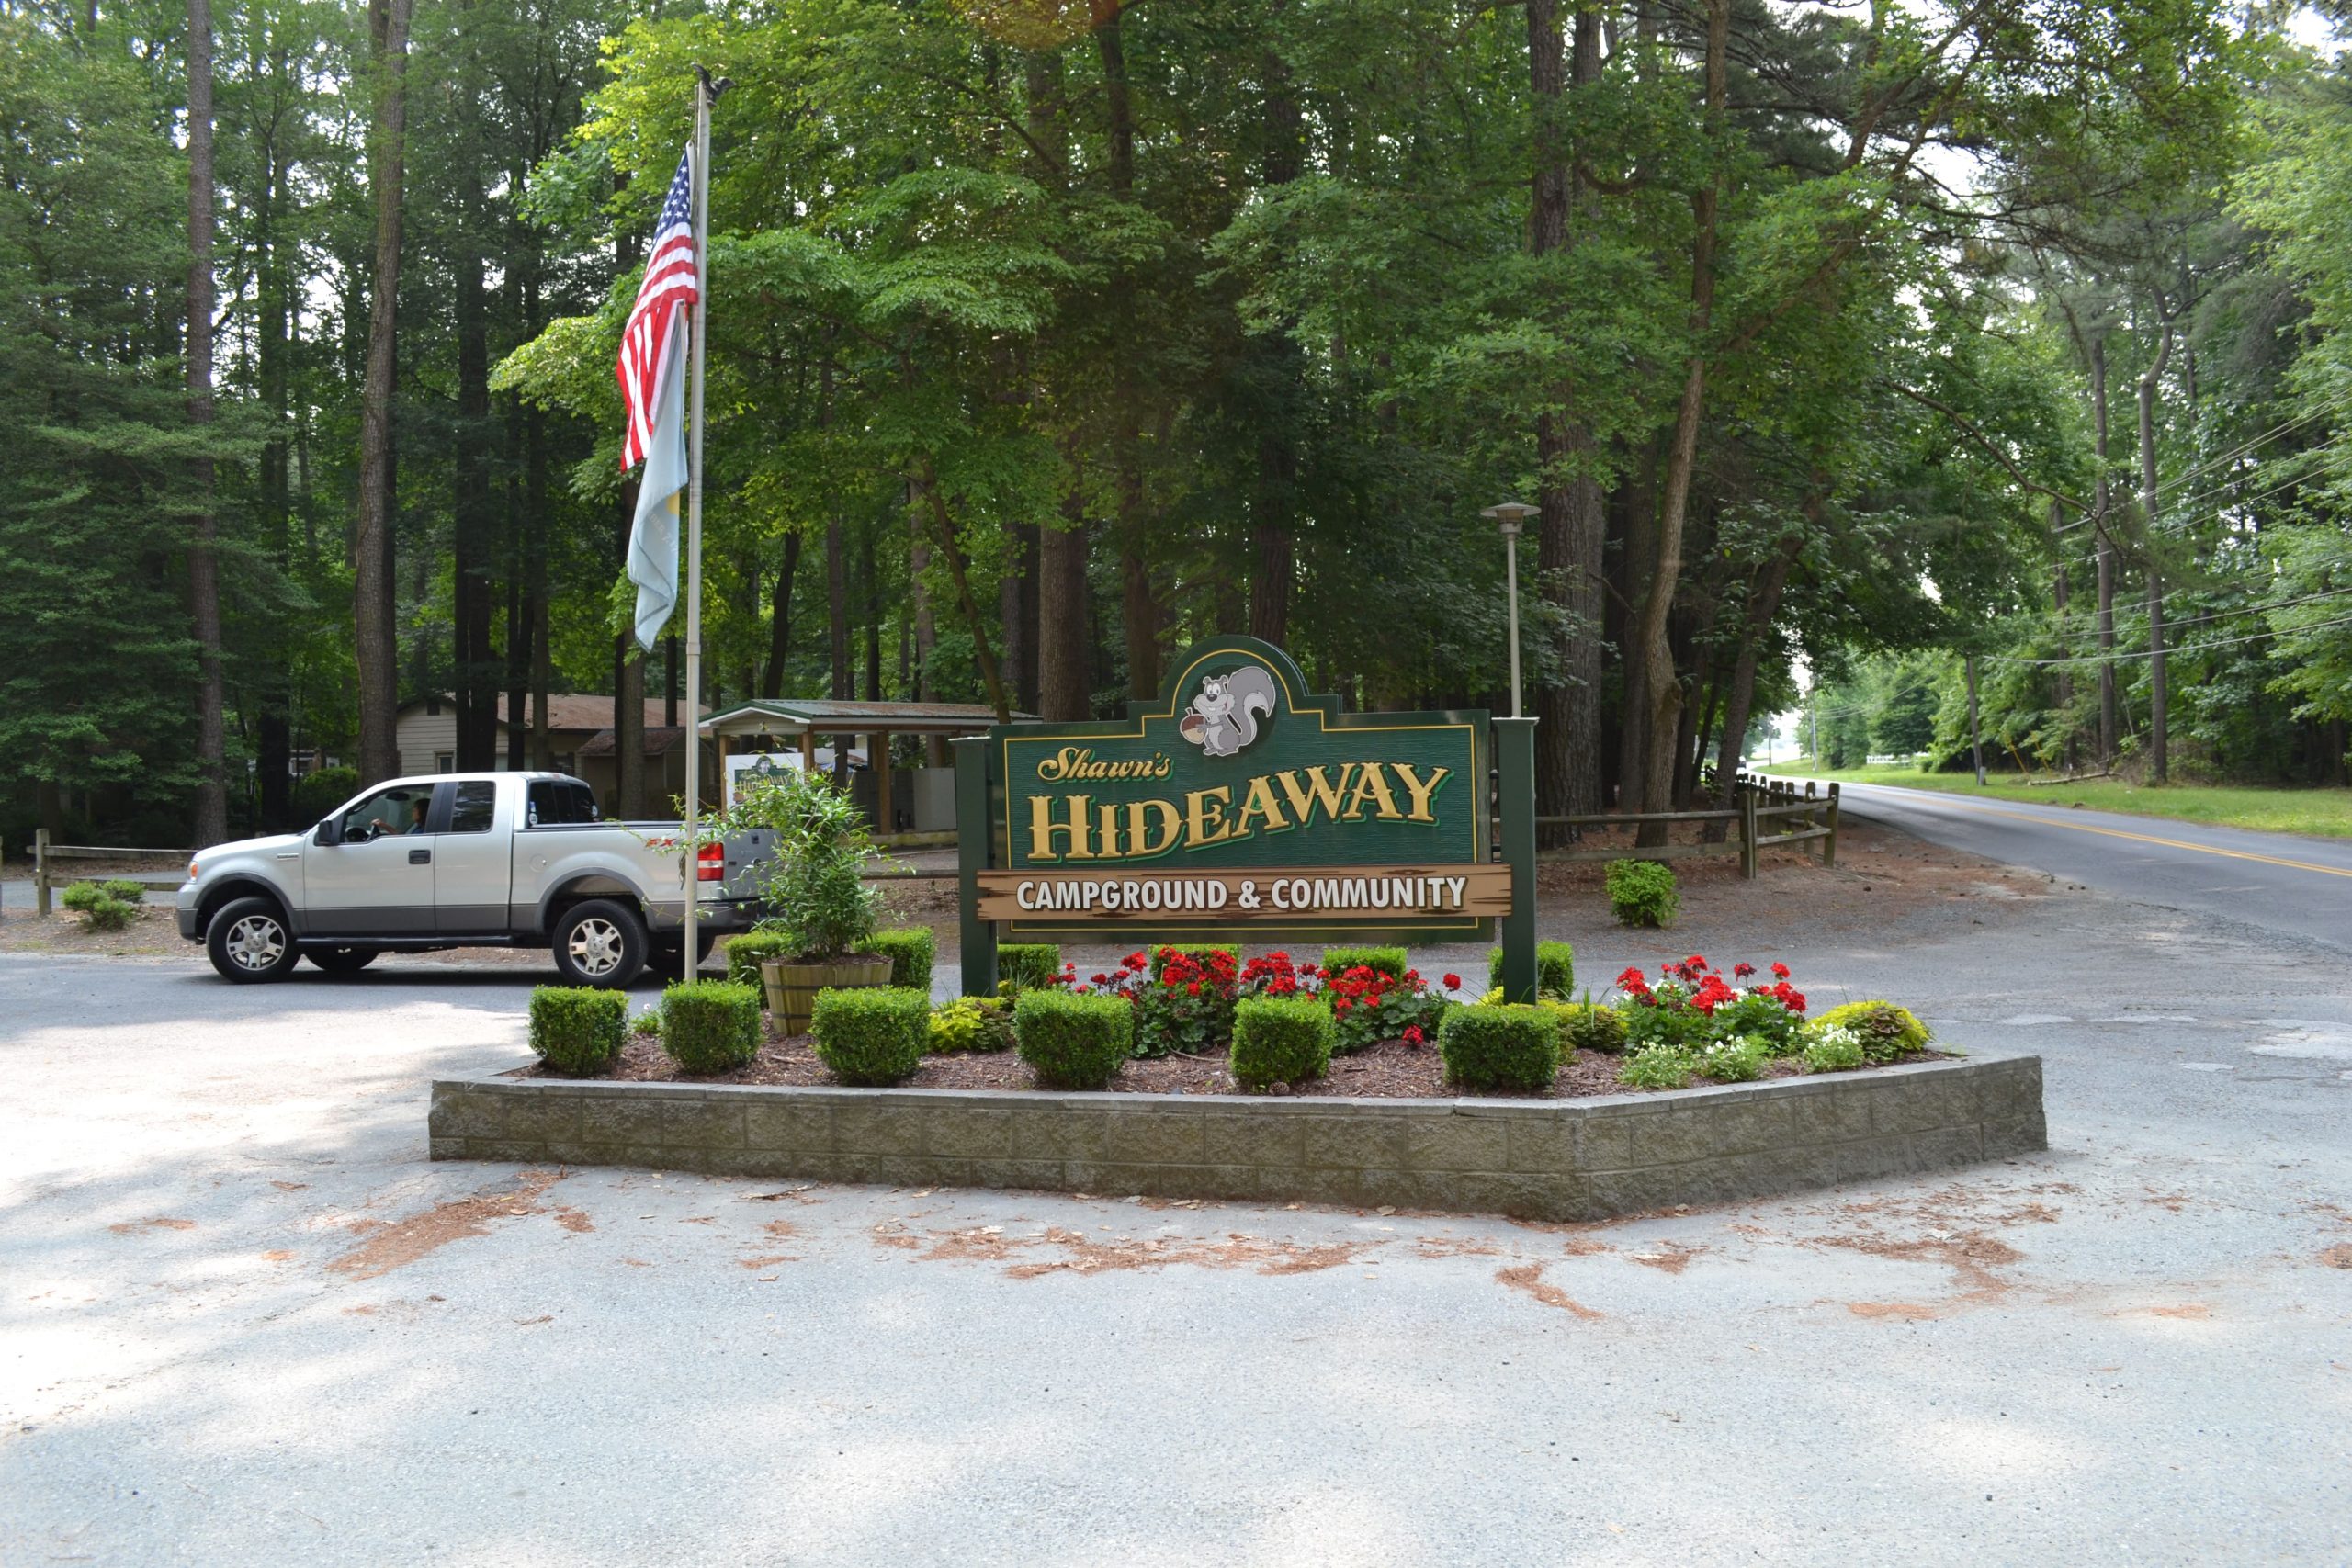 Shawn's Hideaway Campground Entrance